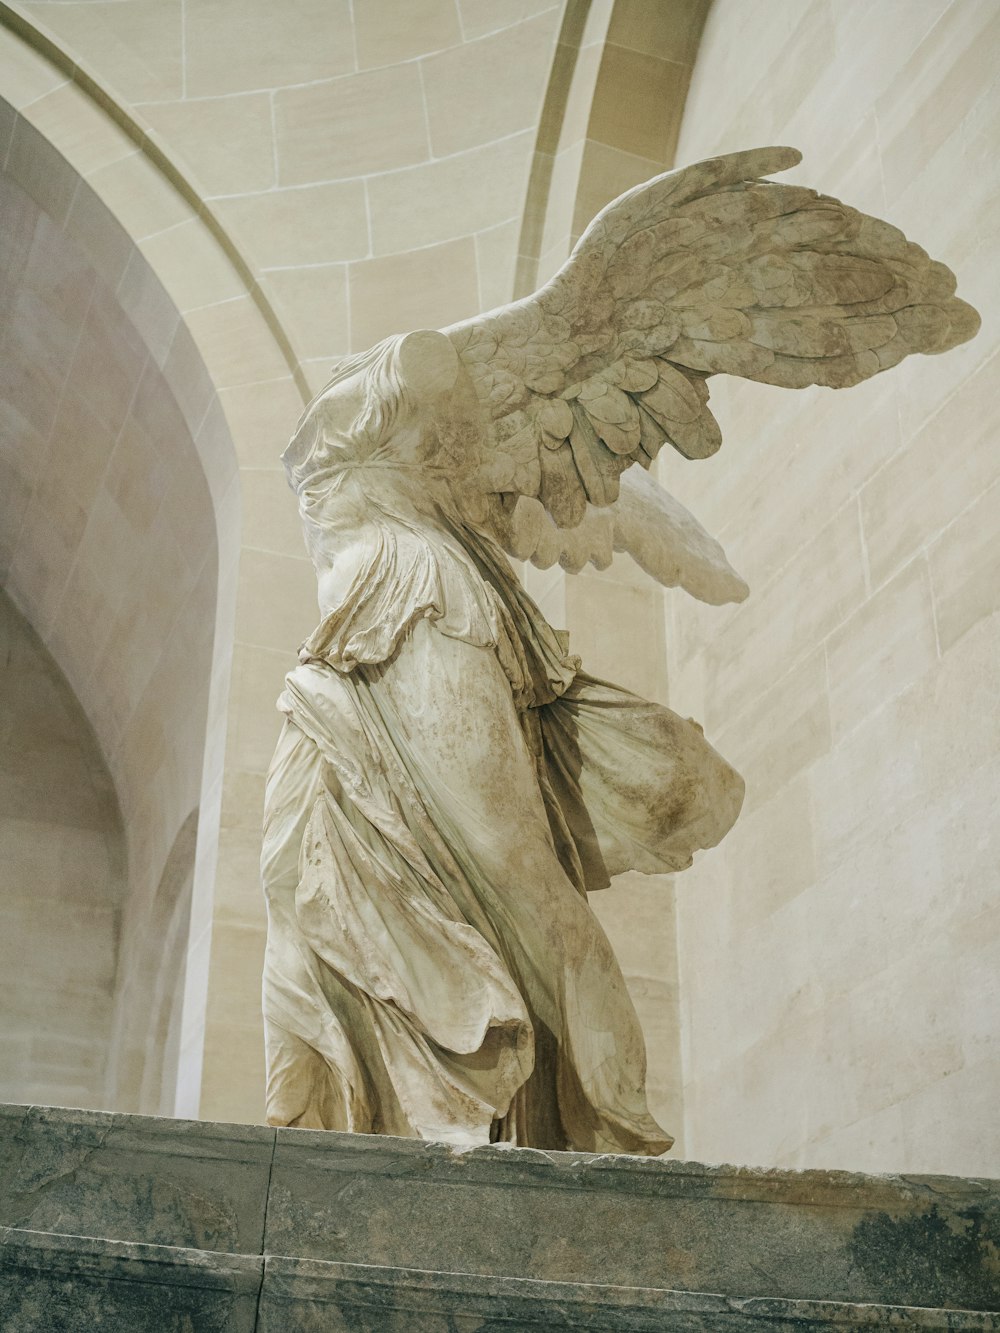 a statue of an angel on a ledge in a building